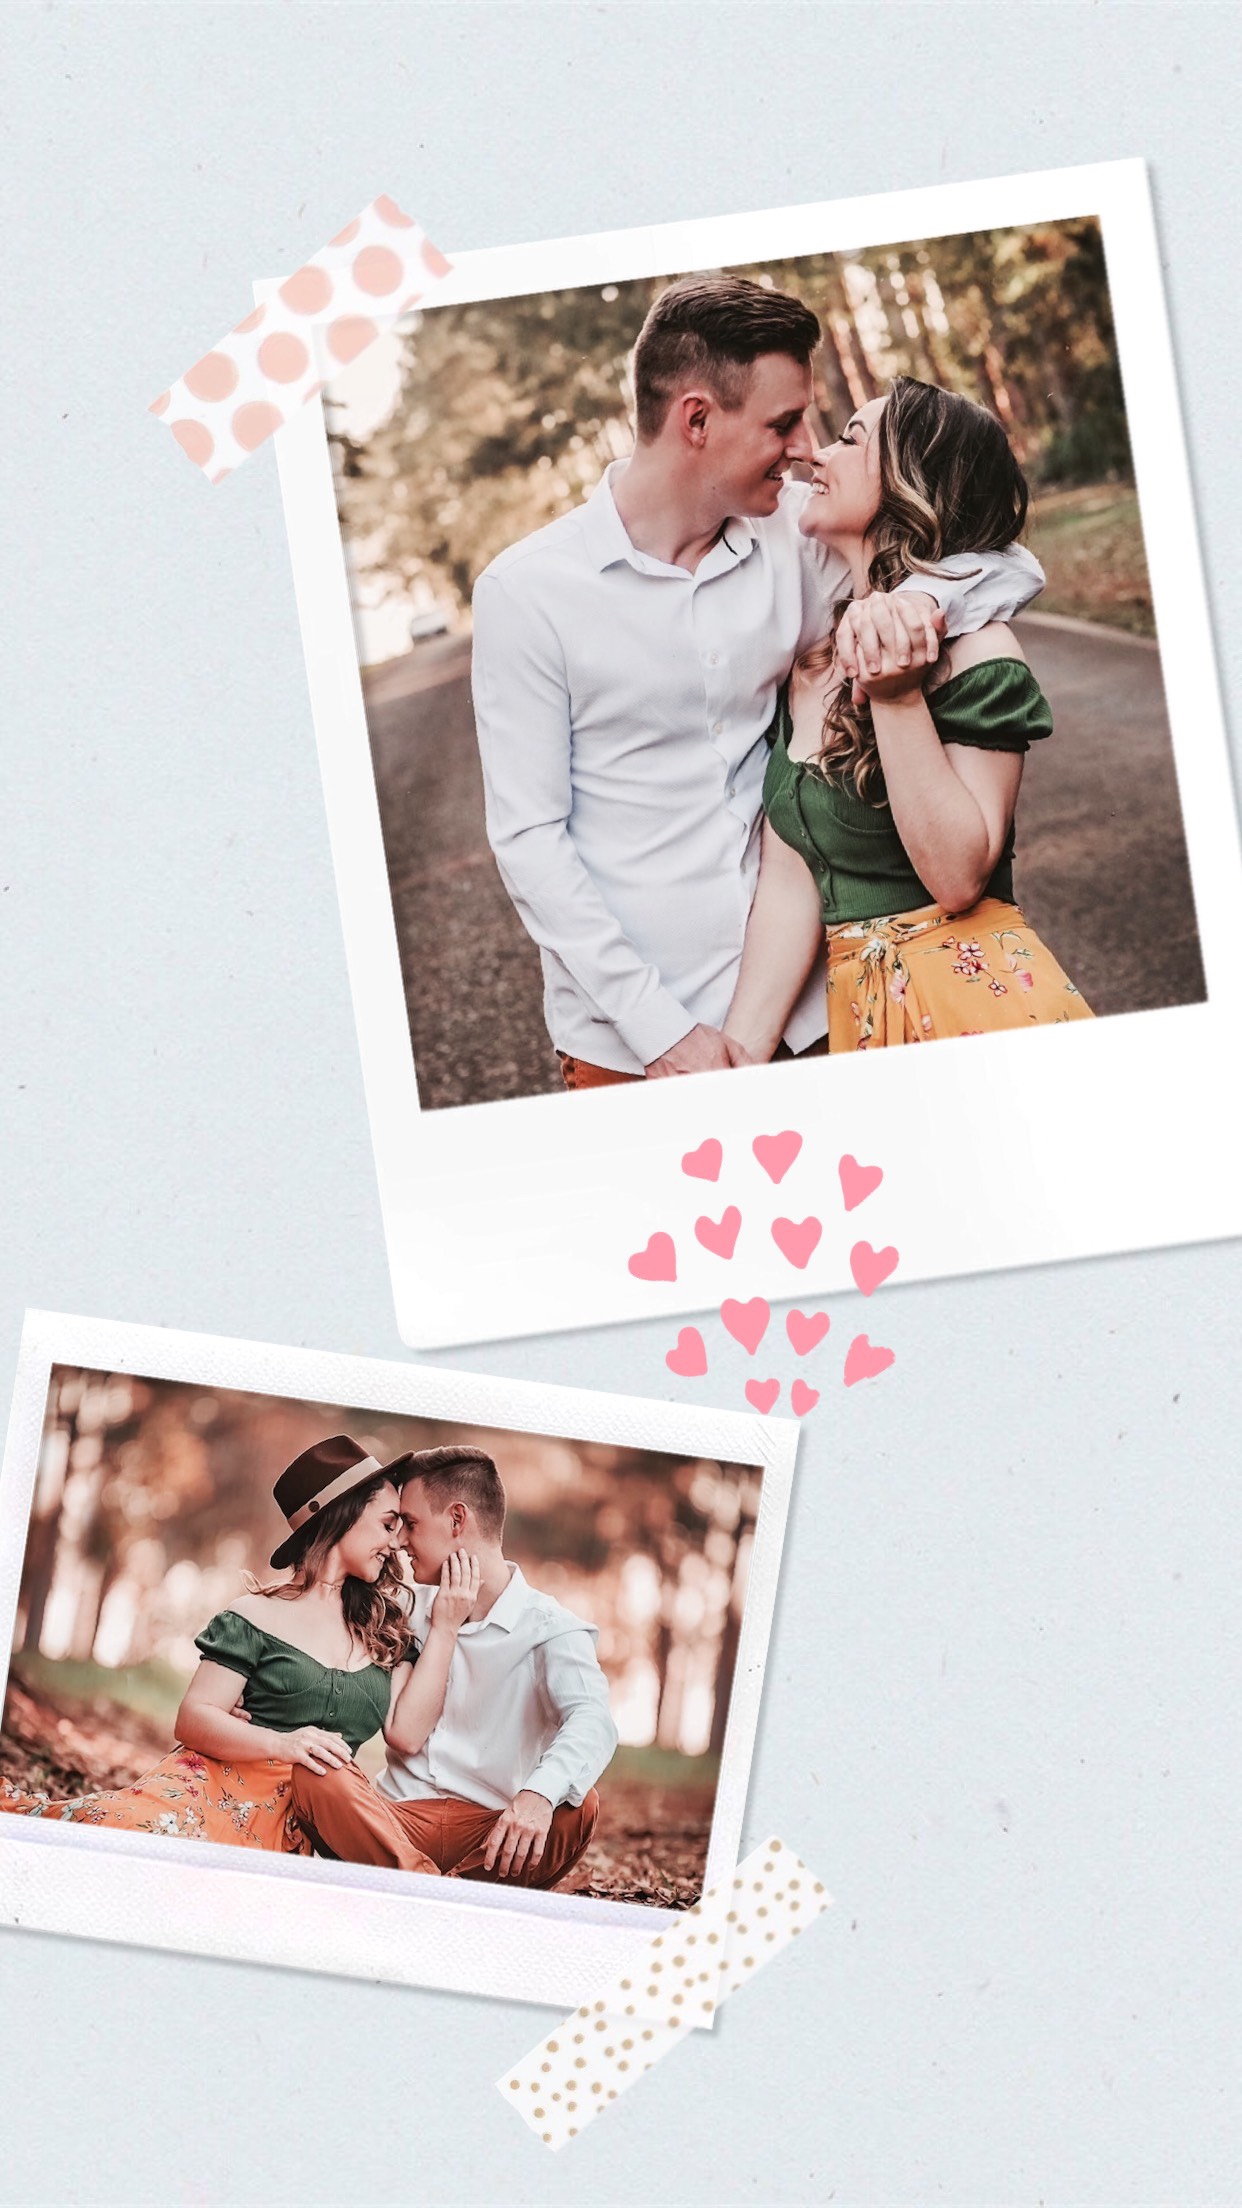 Couple In Love And Hearts Instagram Story Template